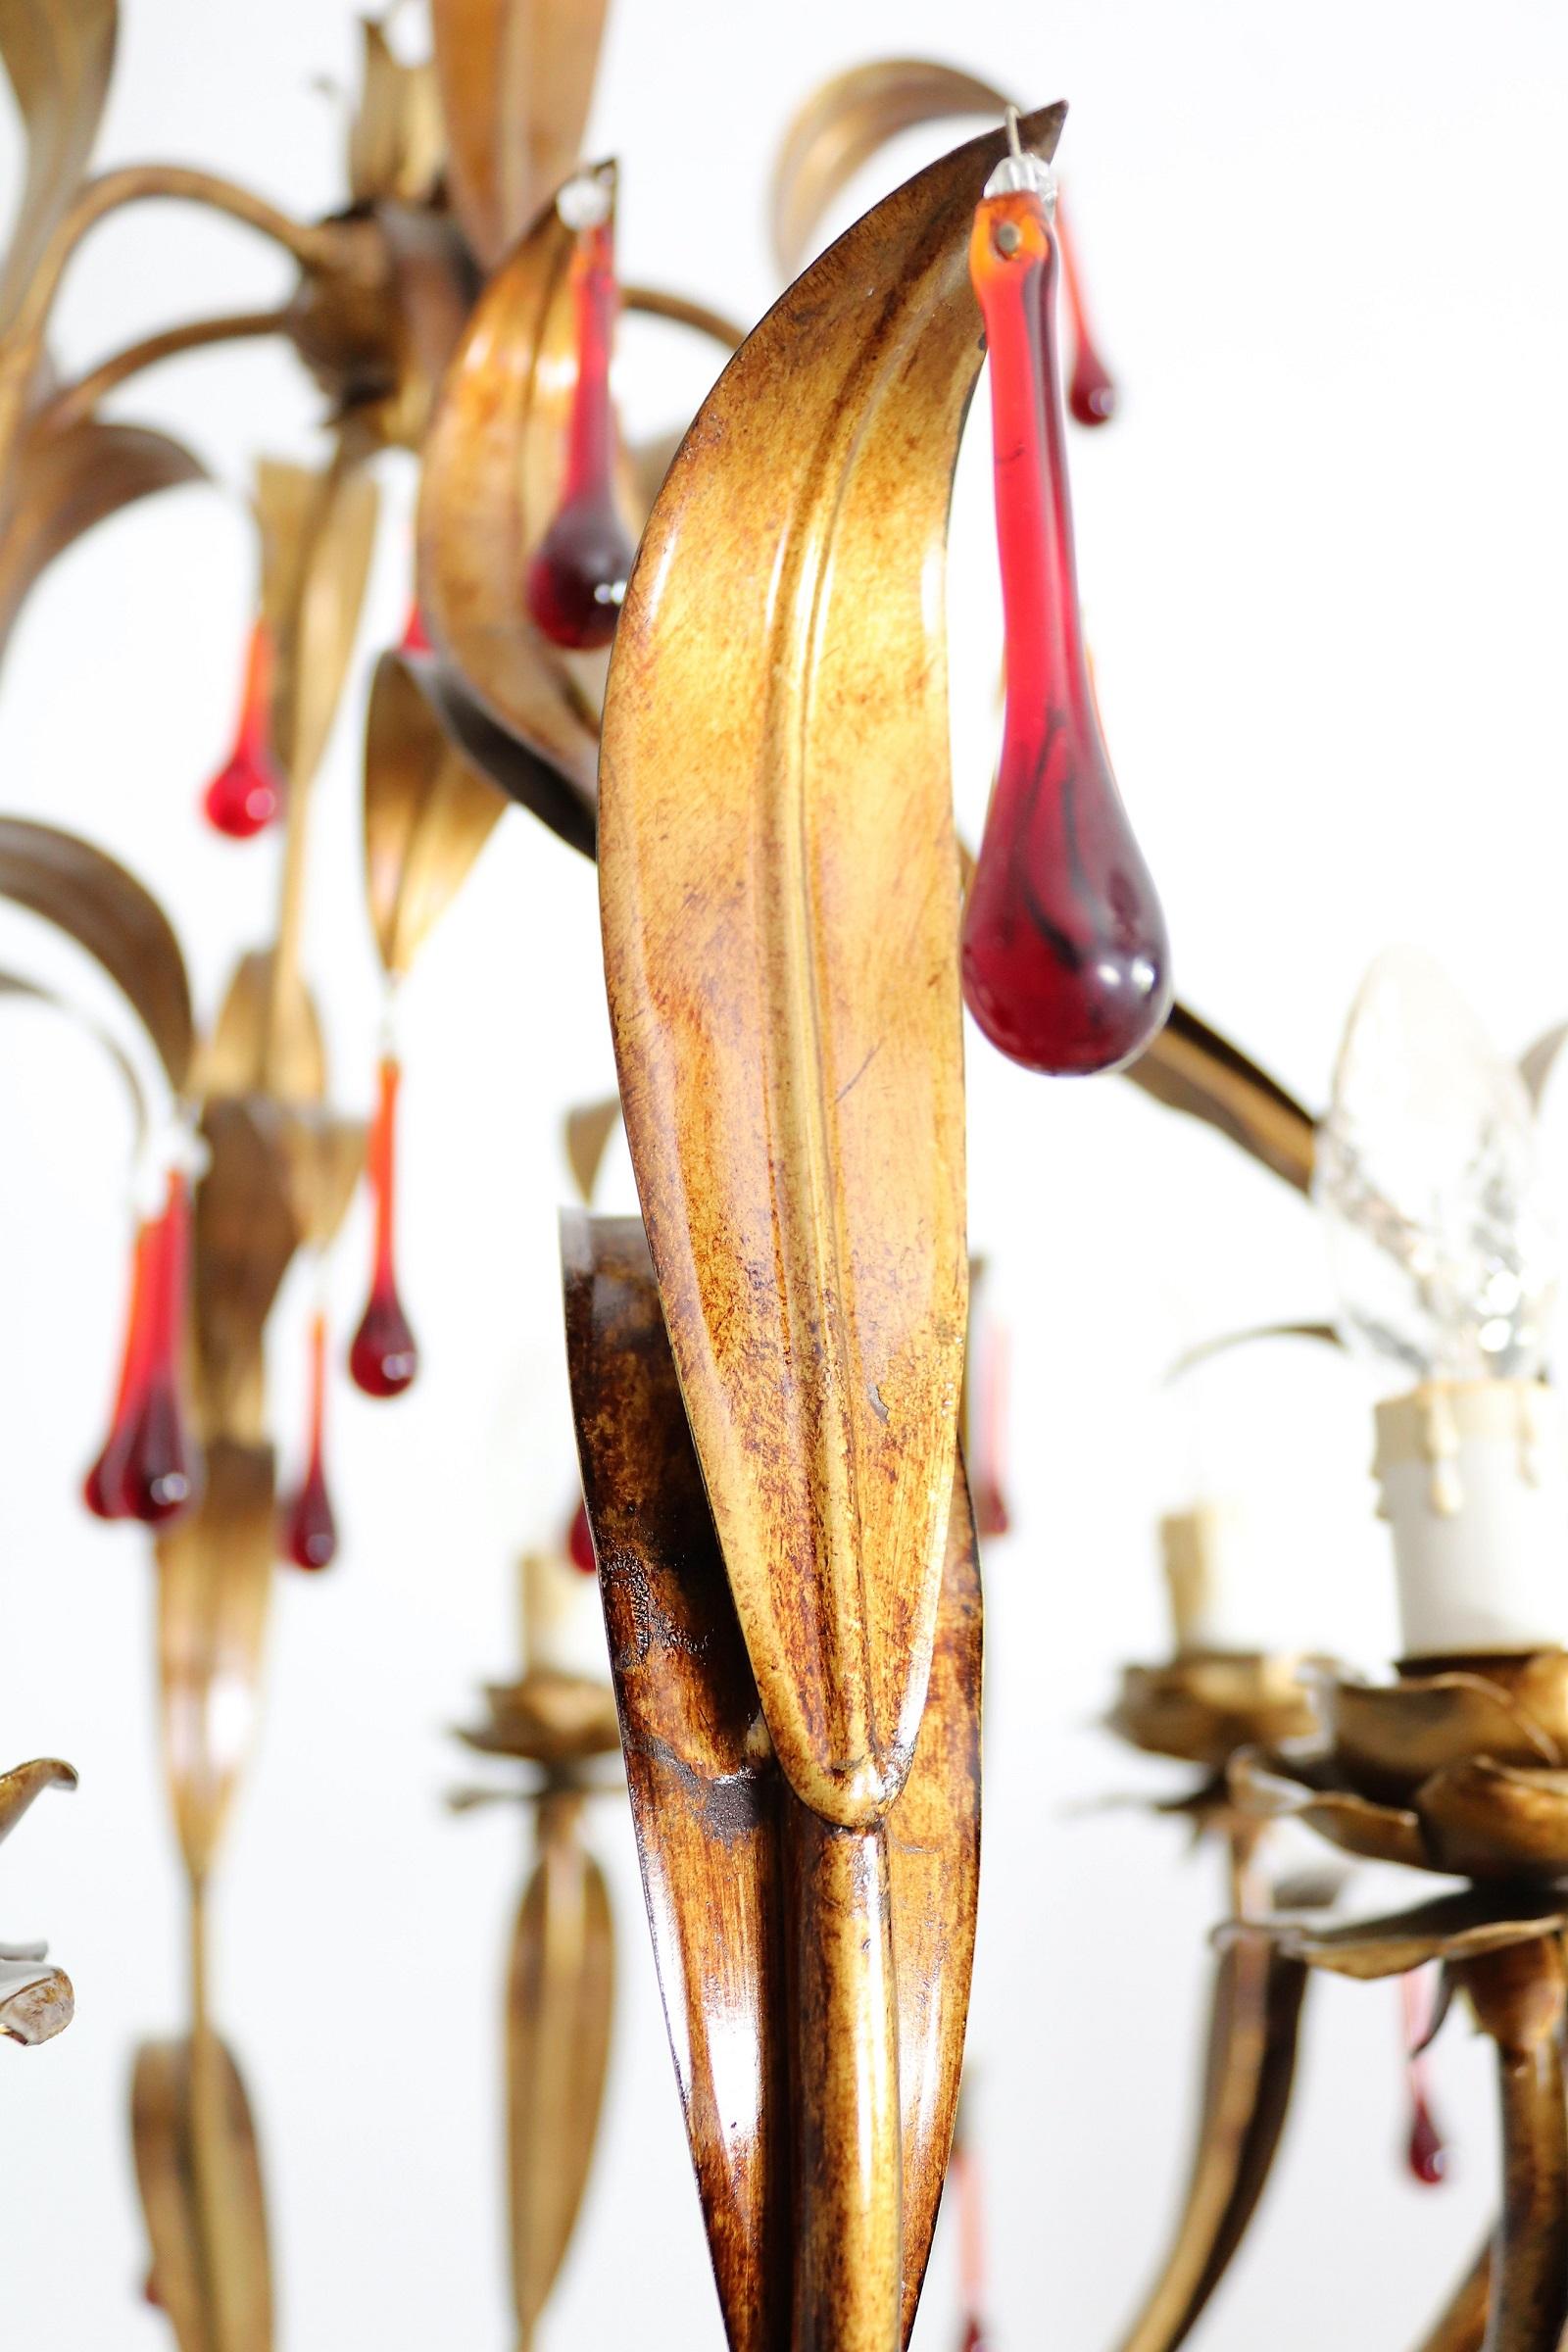 Italian Midcentury Gilt Florentine Chandelier with Red Murano Glass Drops, 1970s For Sale 4